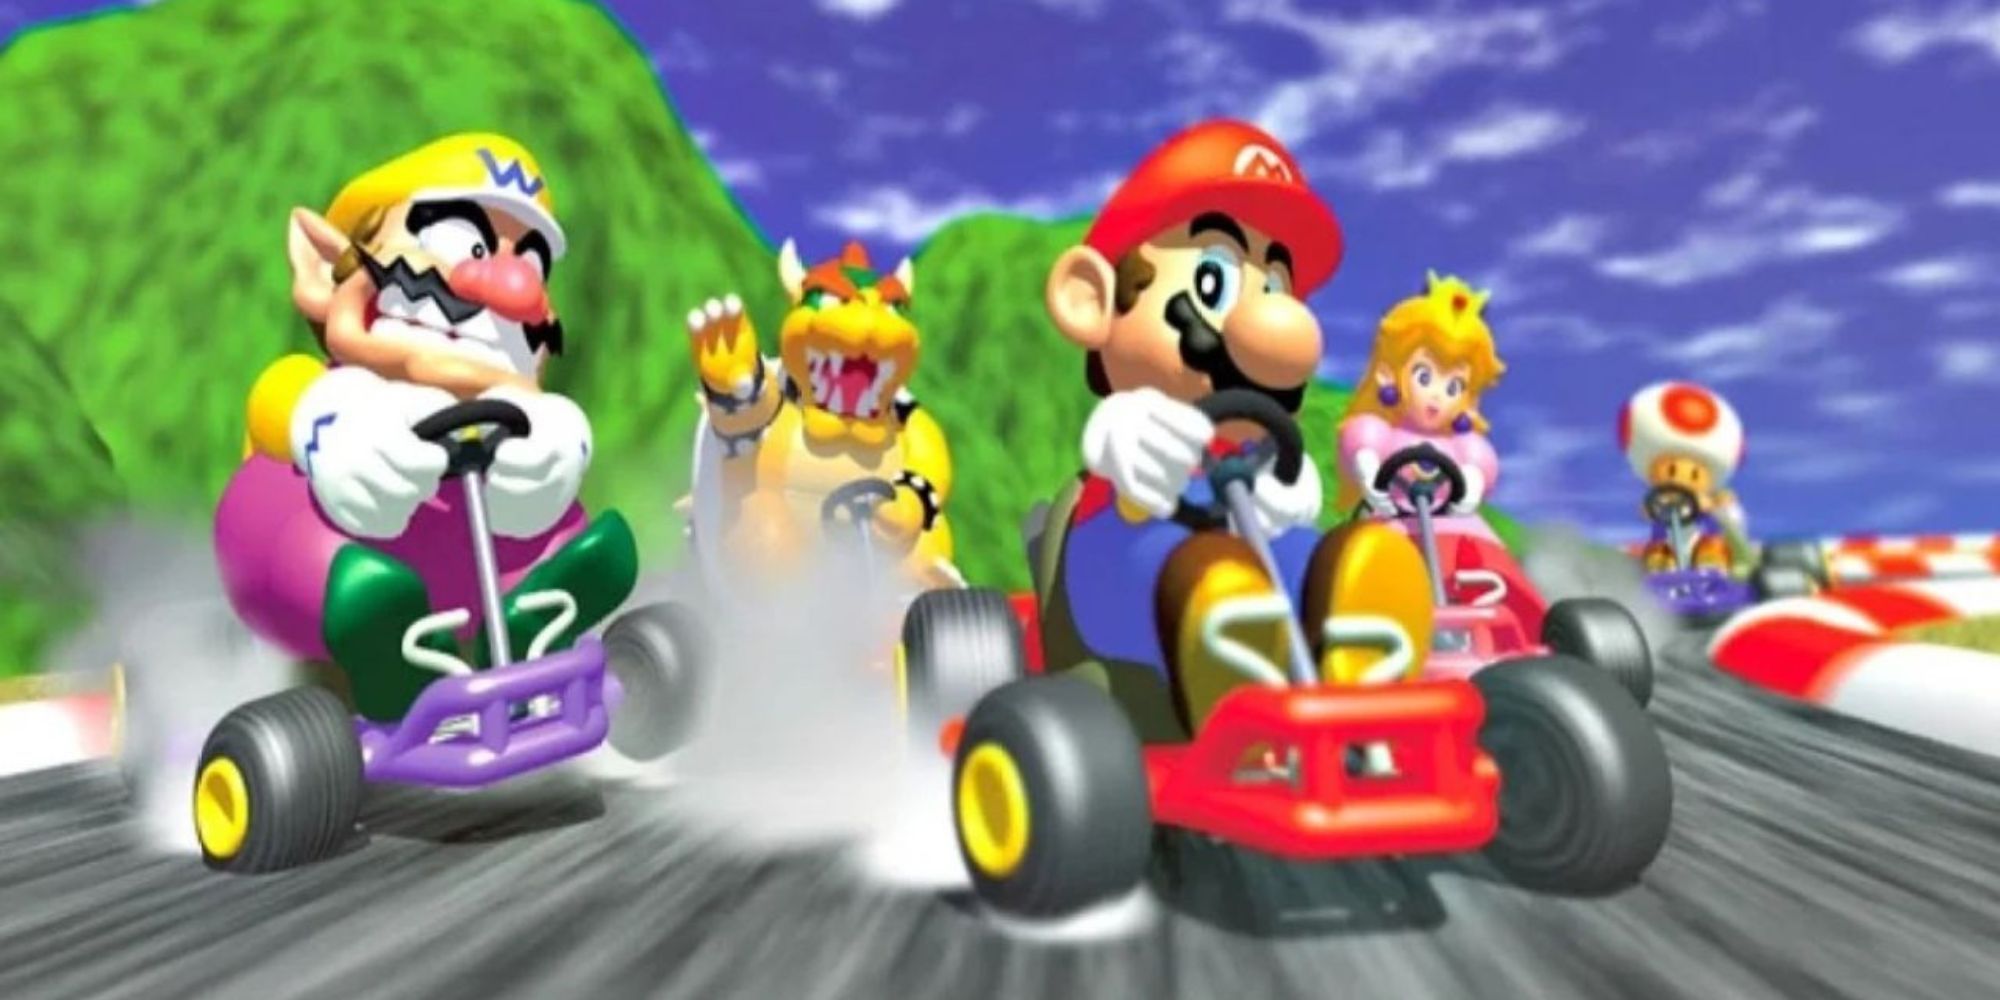 Mario and Wario drift around a corner followed by Bowser, Peach, and Toad